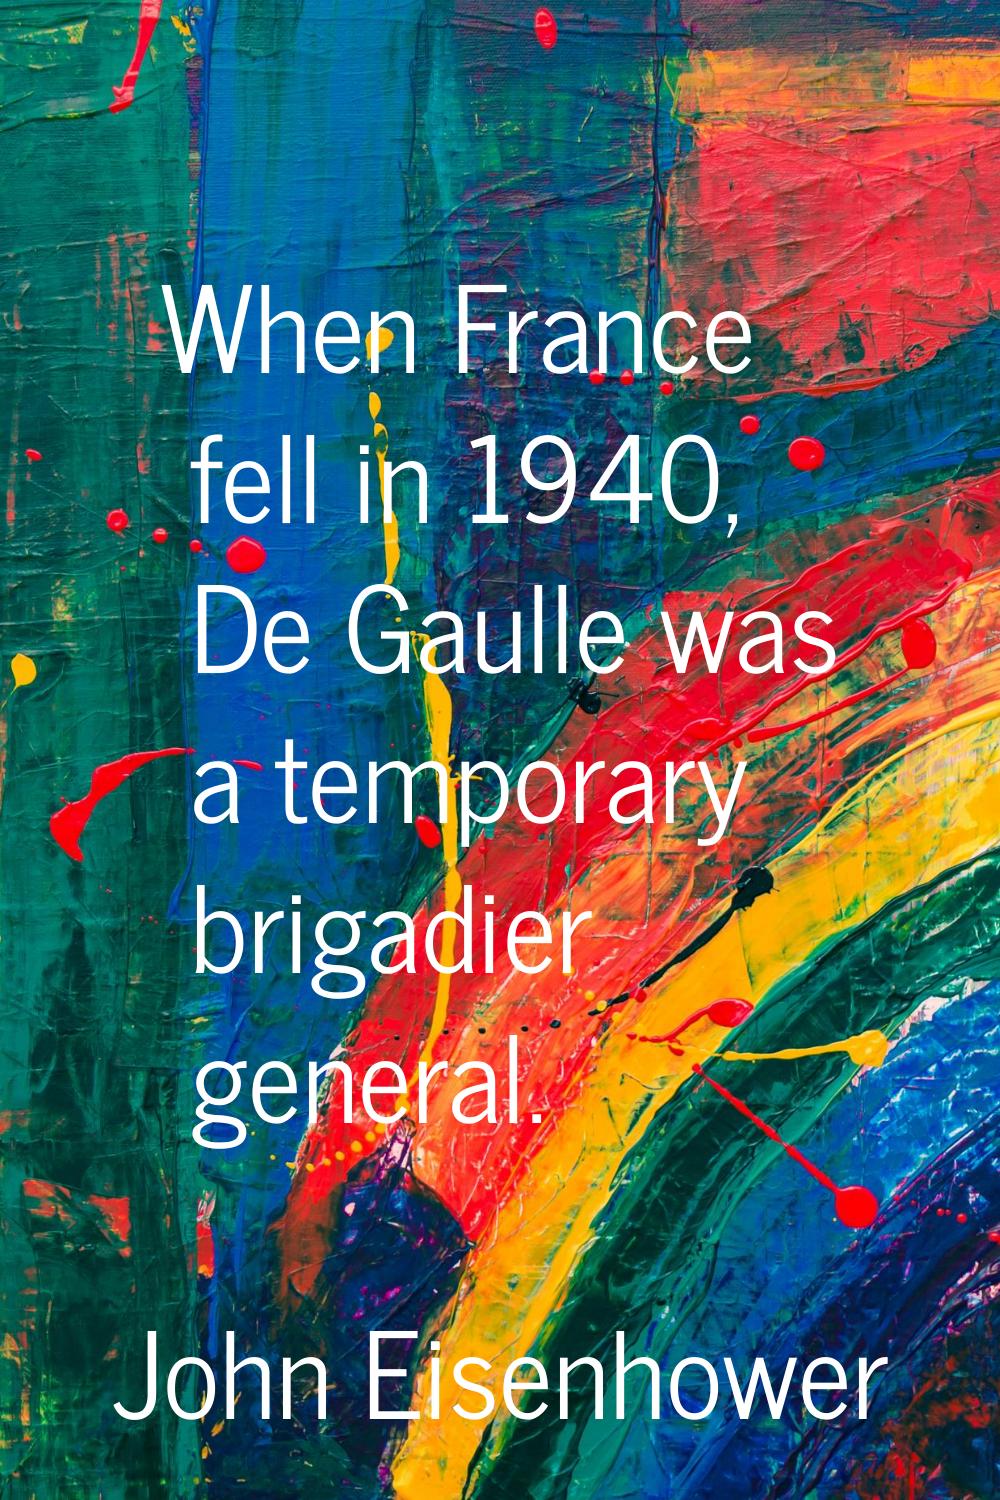 When France fell in 1940, De Gaulle was a temporary brigadier general.